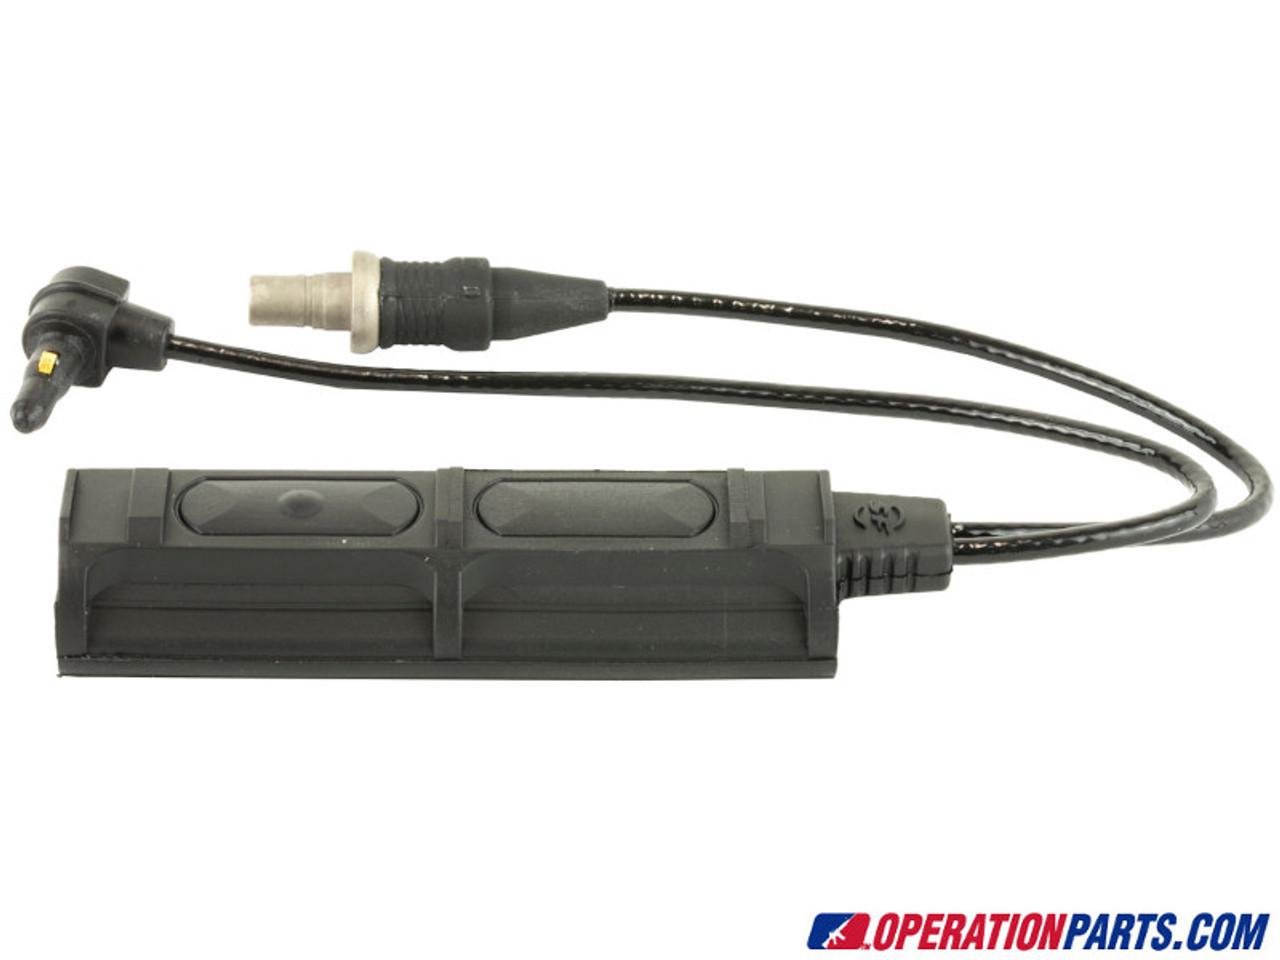 Surefire Remote Dual Switch for Weaponlights, ATPIAL Laser Device, 7" Cable  (SR07-D-IT)